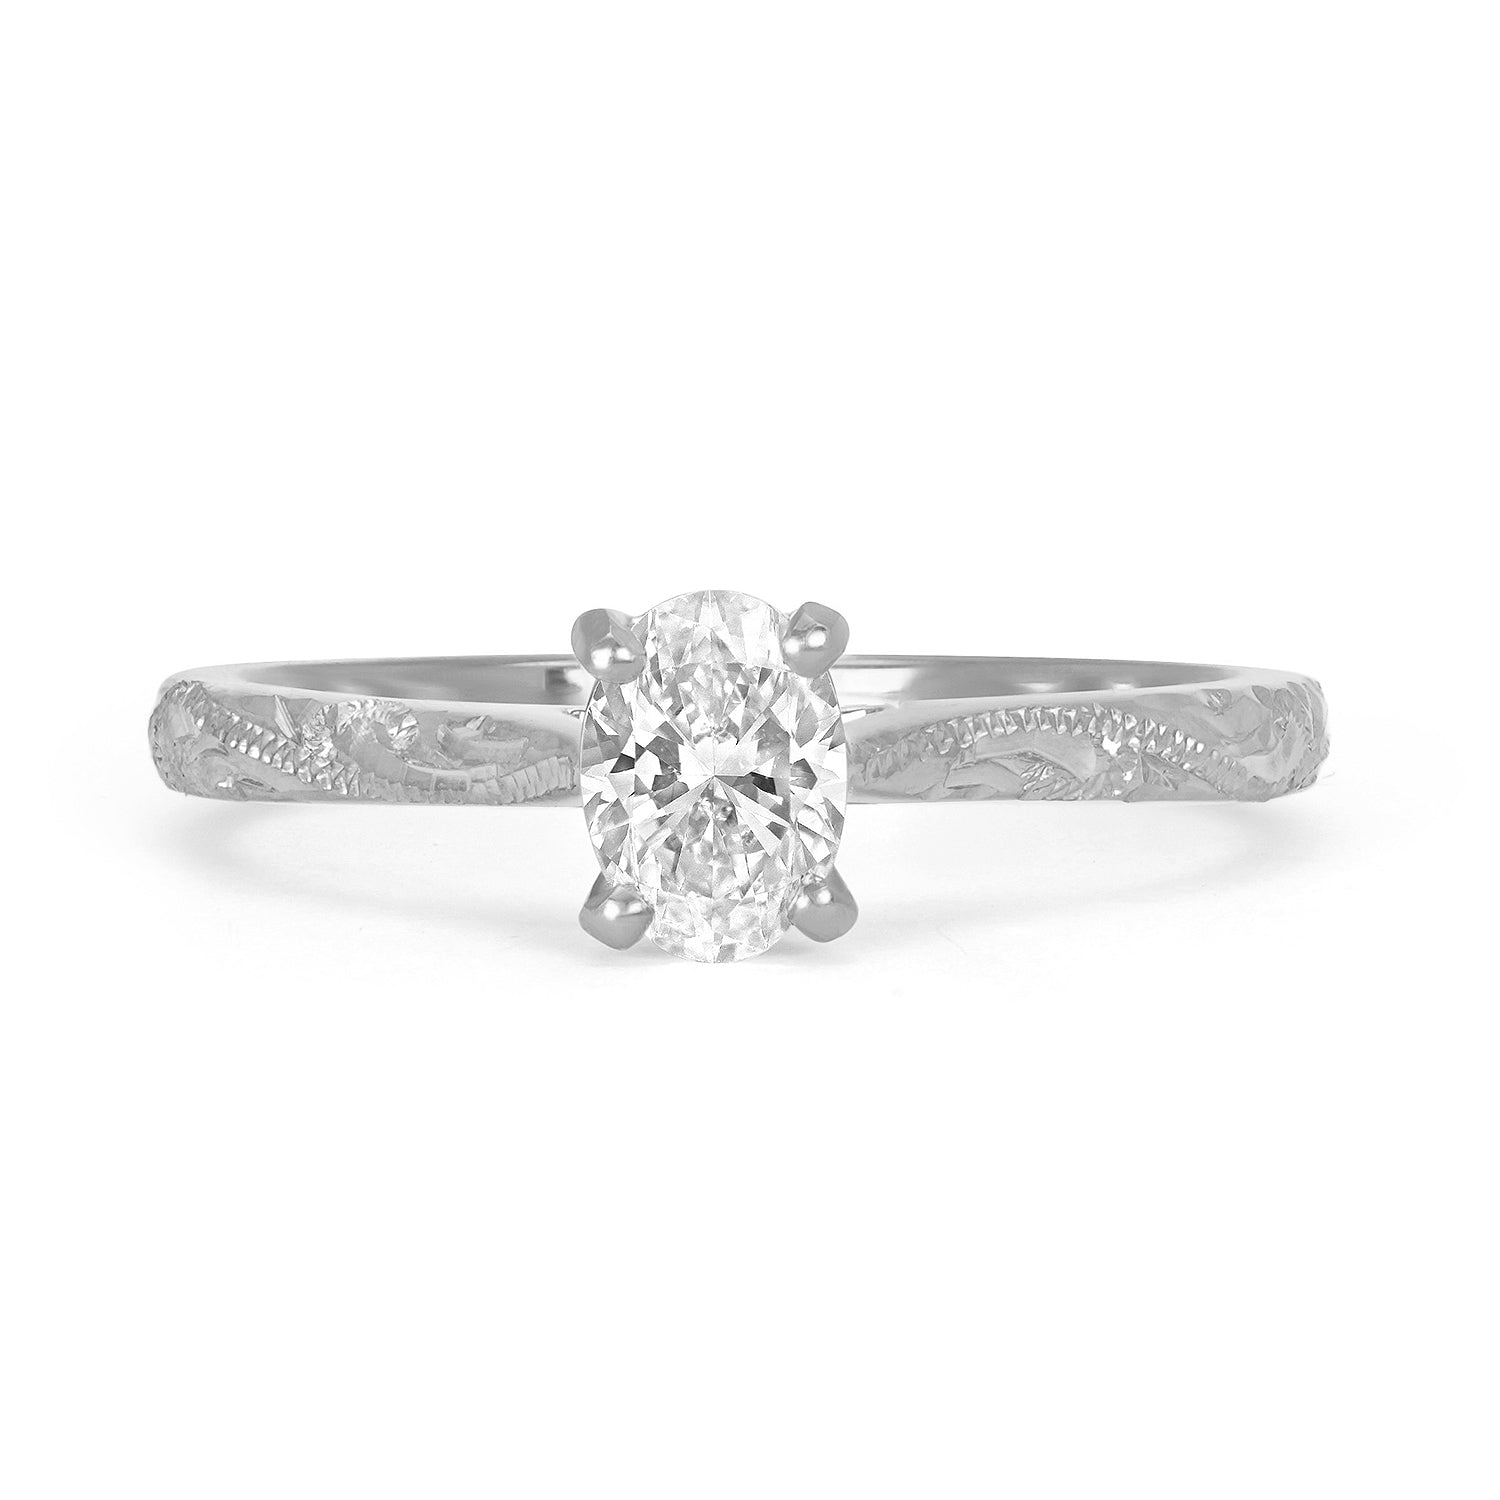 Athena Grande Oval Ethical Diamond Platinum Engagement Ring, oval-cut conflict-free diamond and 100% recycled platinum